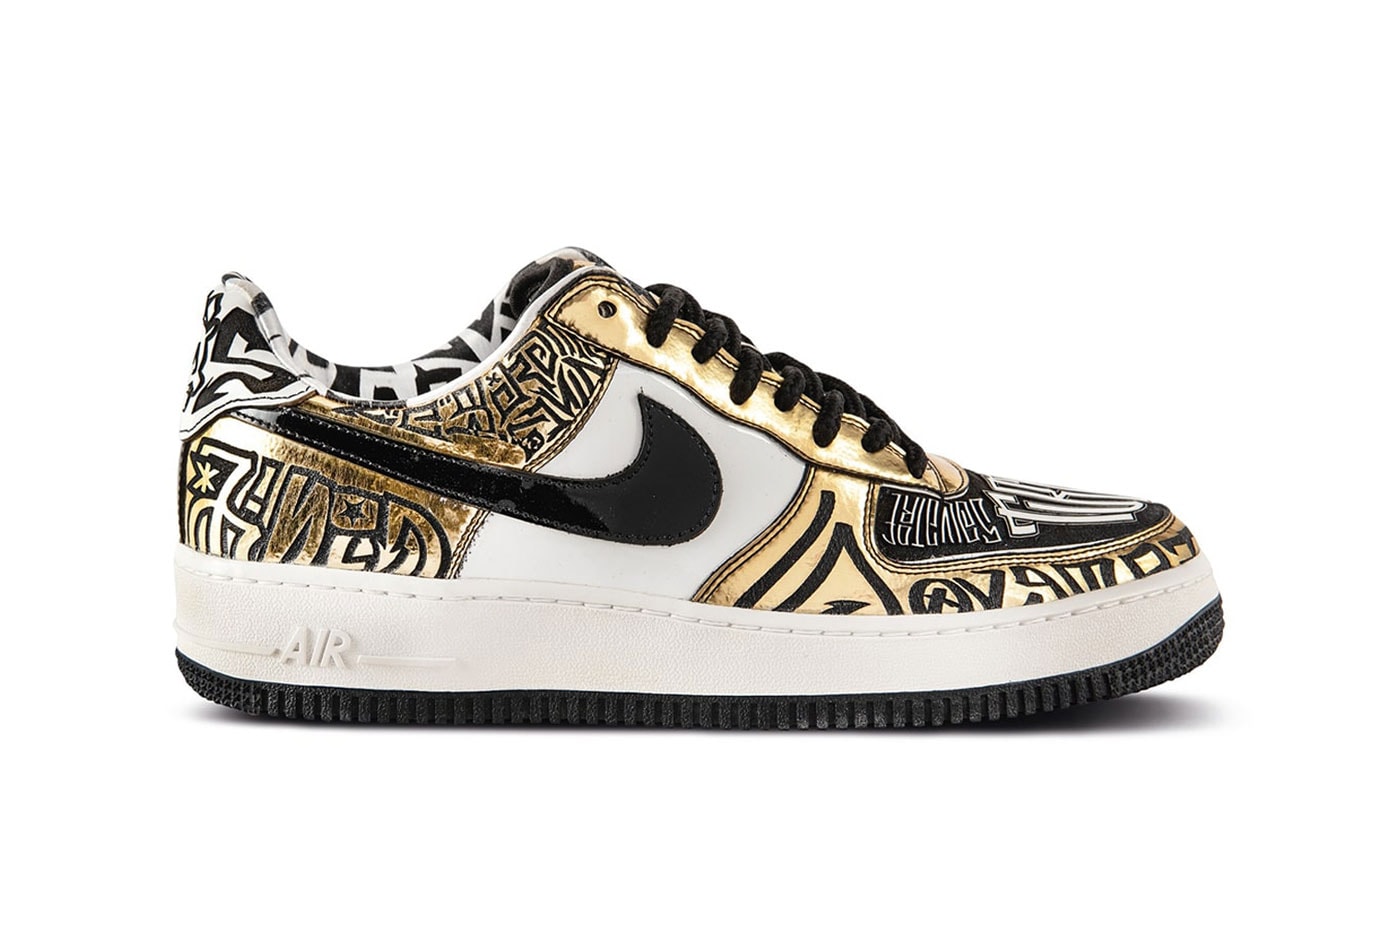 Sothebys auctions Nike Air Force 1 Entourage x Undefeated Fukijama Gold Premium Georges white and light blue los angeles queens boulevard film bruce kilgore AF1 dunk low samples hyperdrunks cp3 release info news